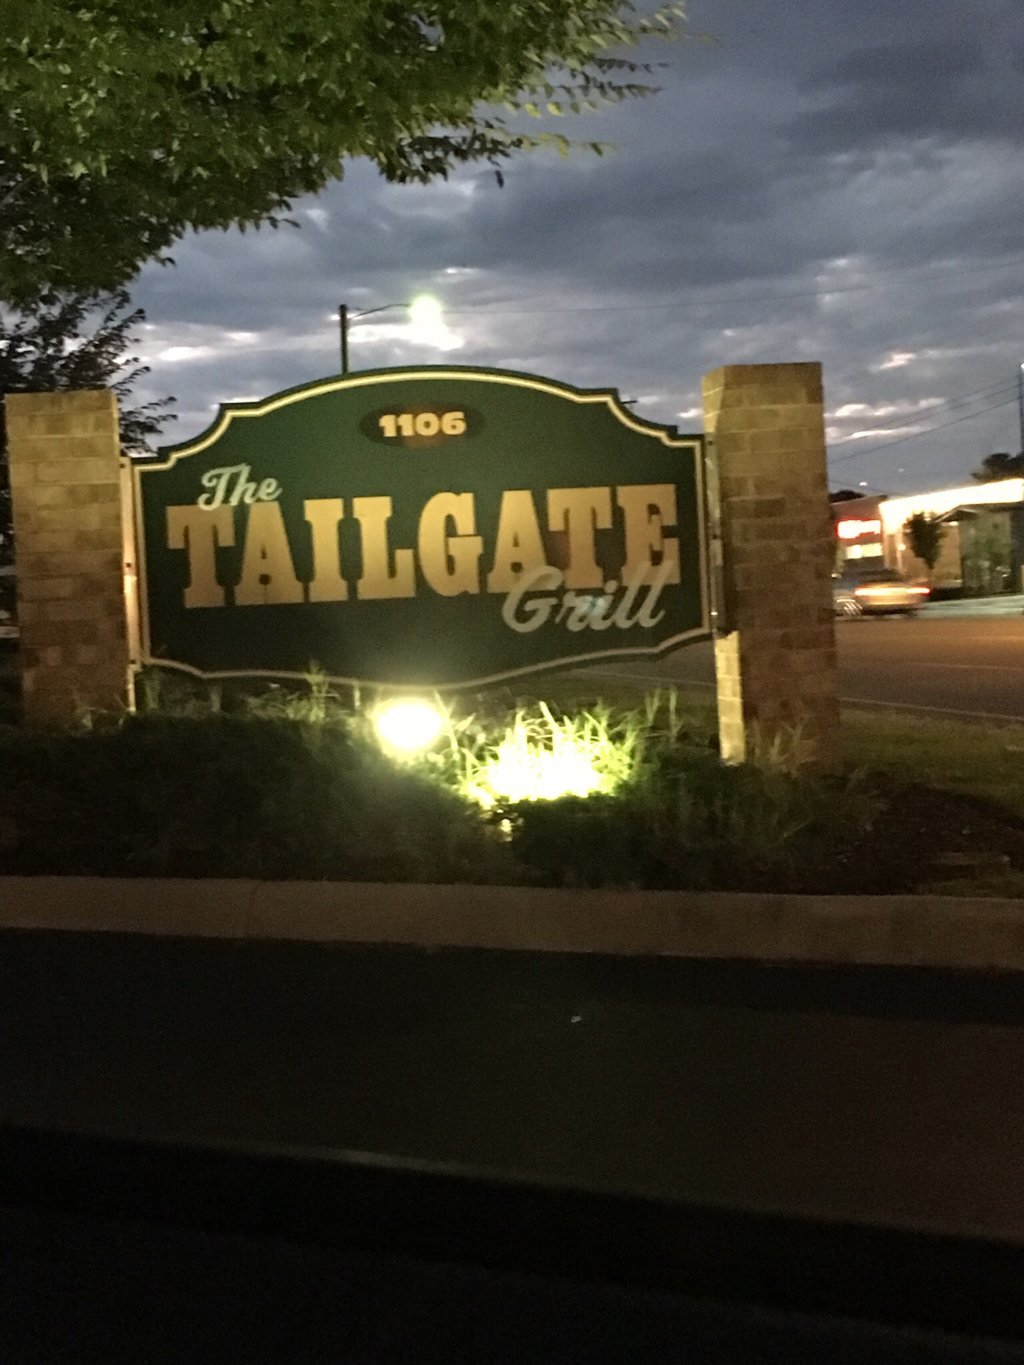 The Tailgate Grill